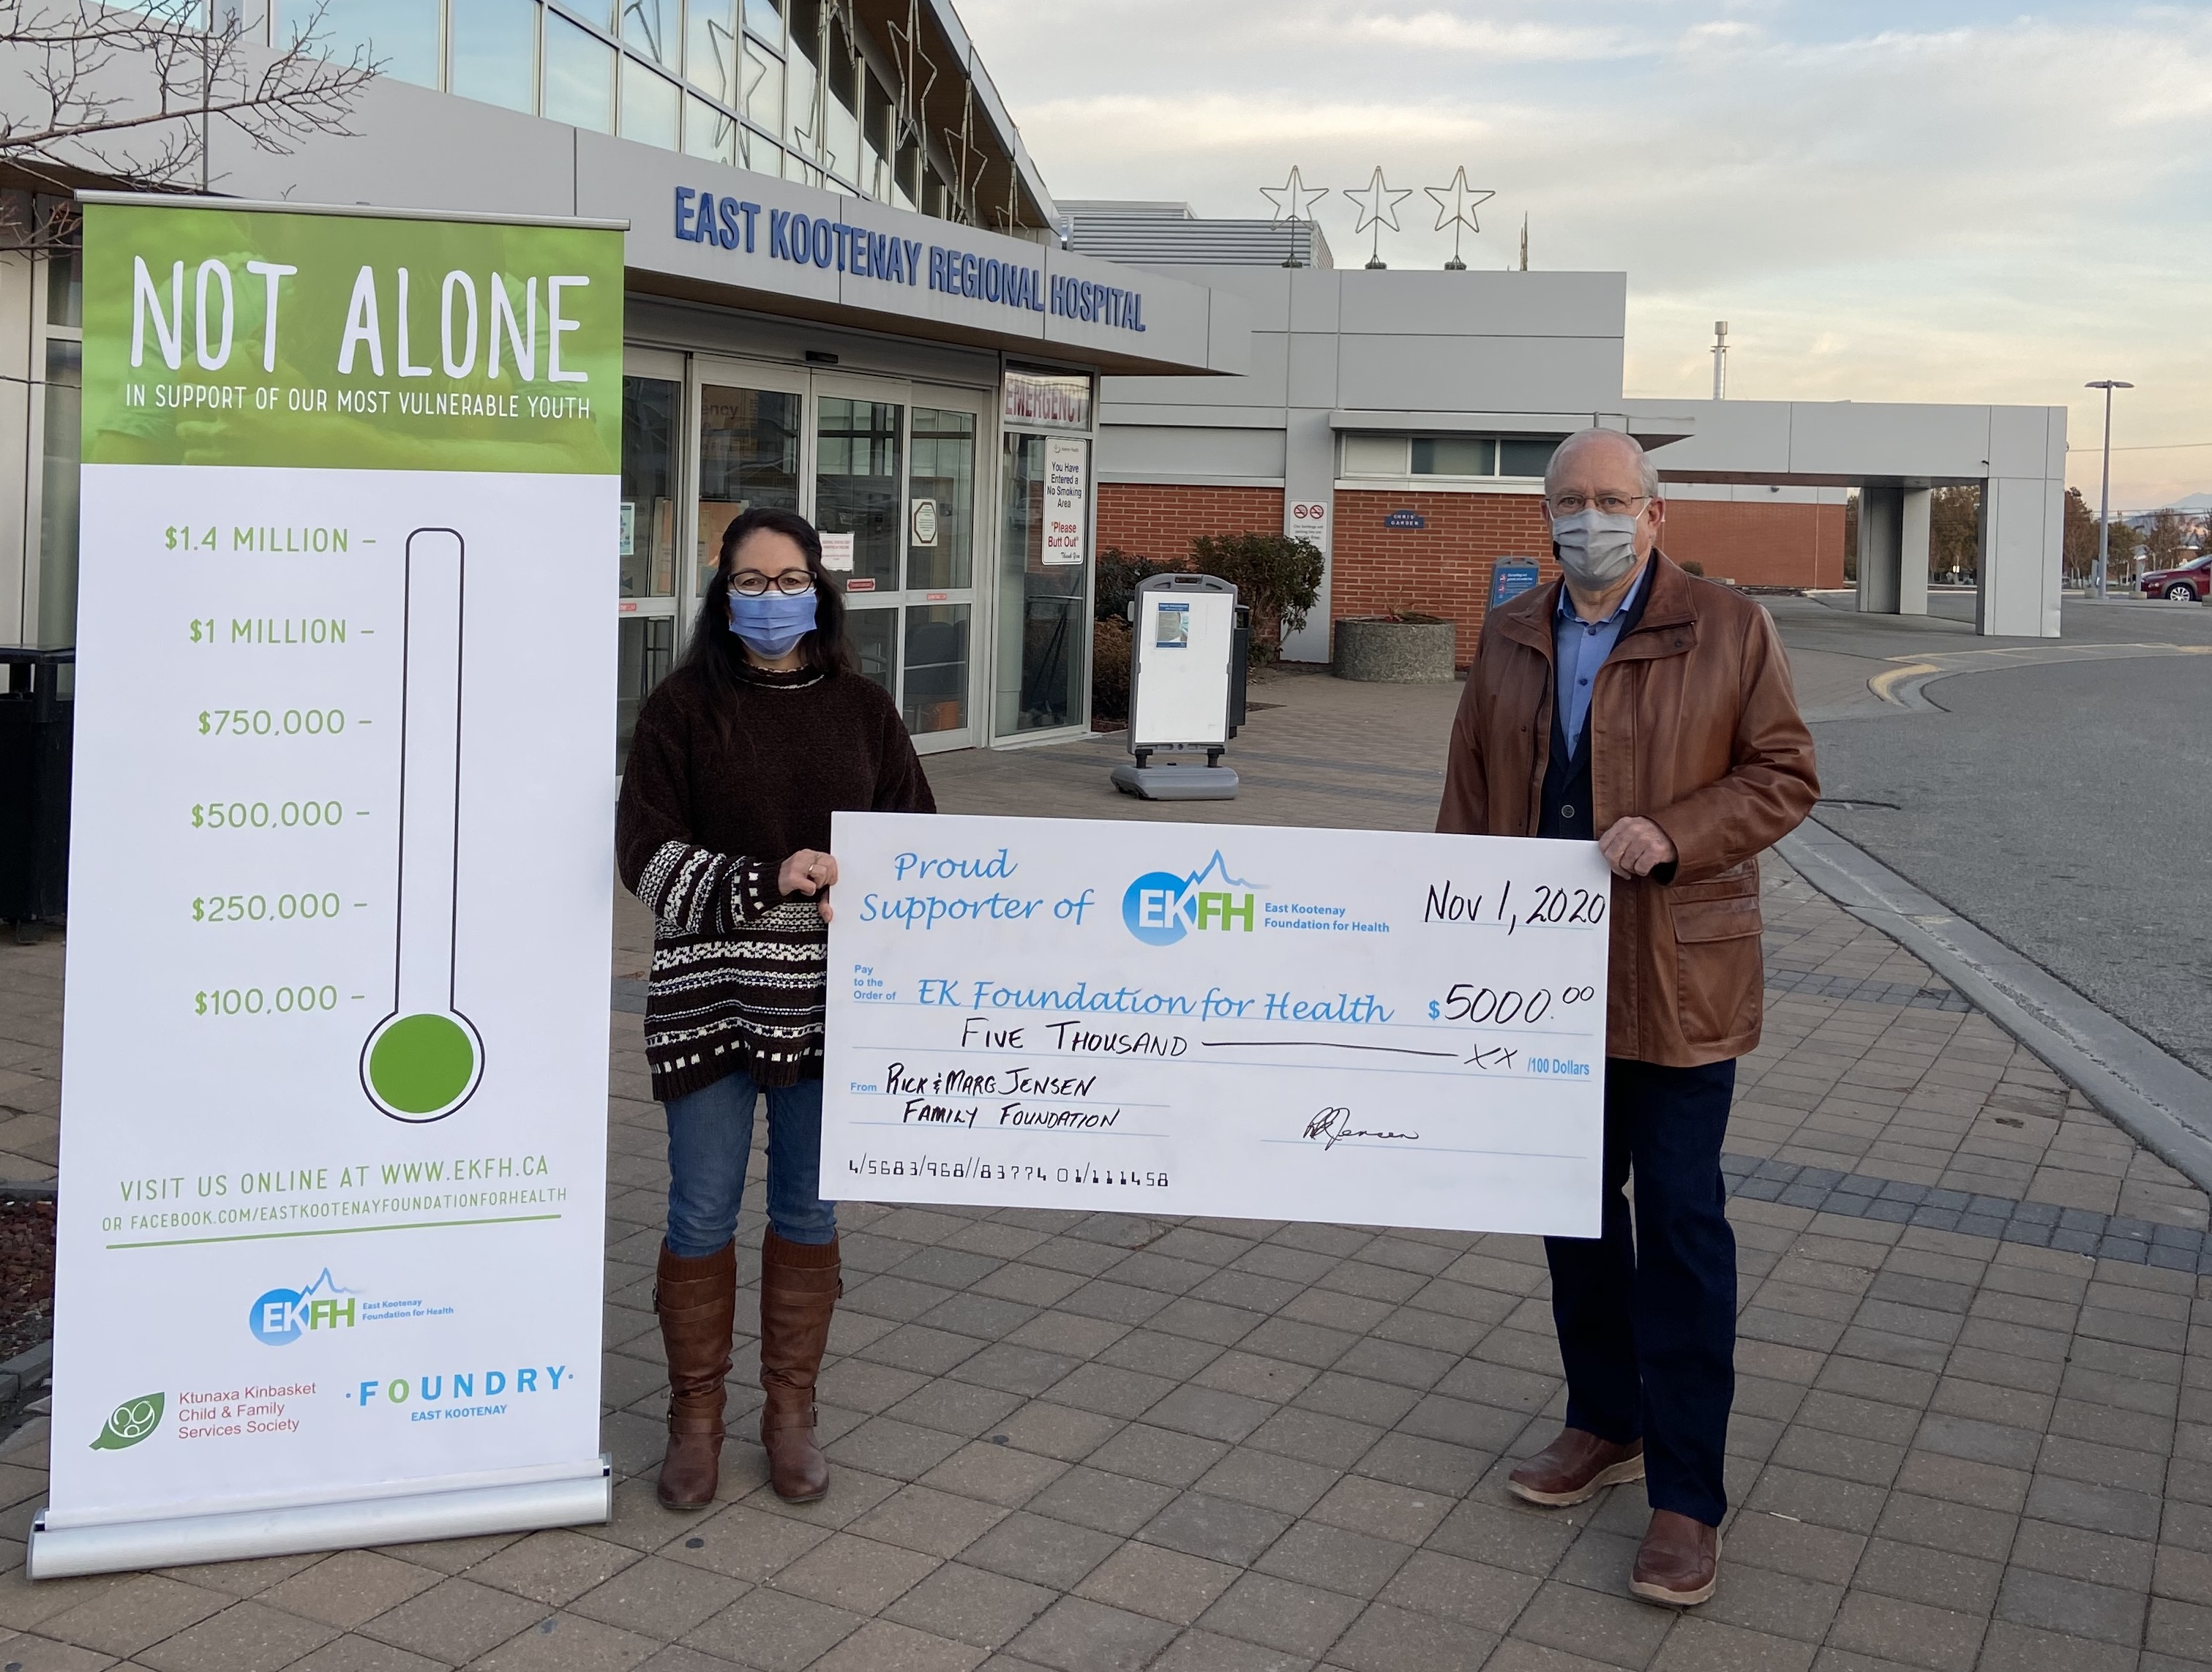 A woman with long dark hair and wearing a face mask, long black sweater, blue jeans and boots holds a large cheque with a man with grey hair, glasses, a face mask, brown leather jacket and black pants in front of a hospital and sign that says Not Alone In support of our most vulnerable youth